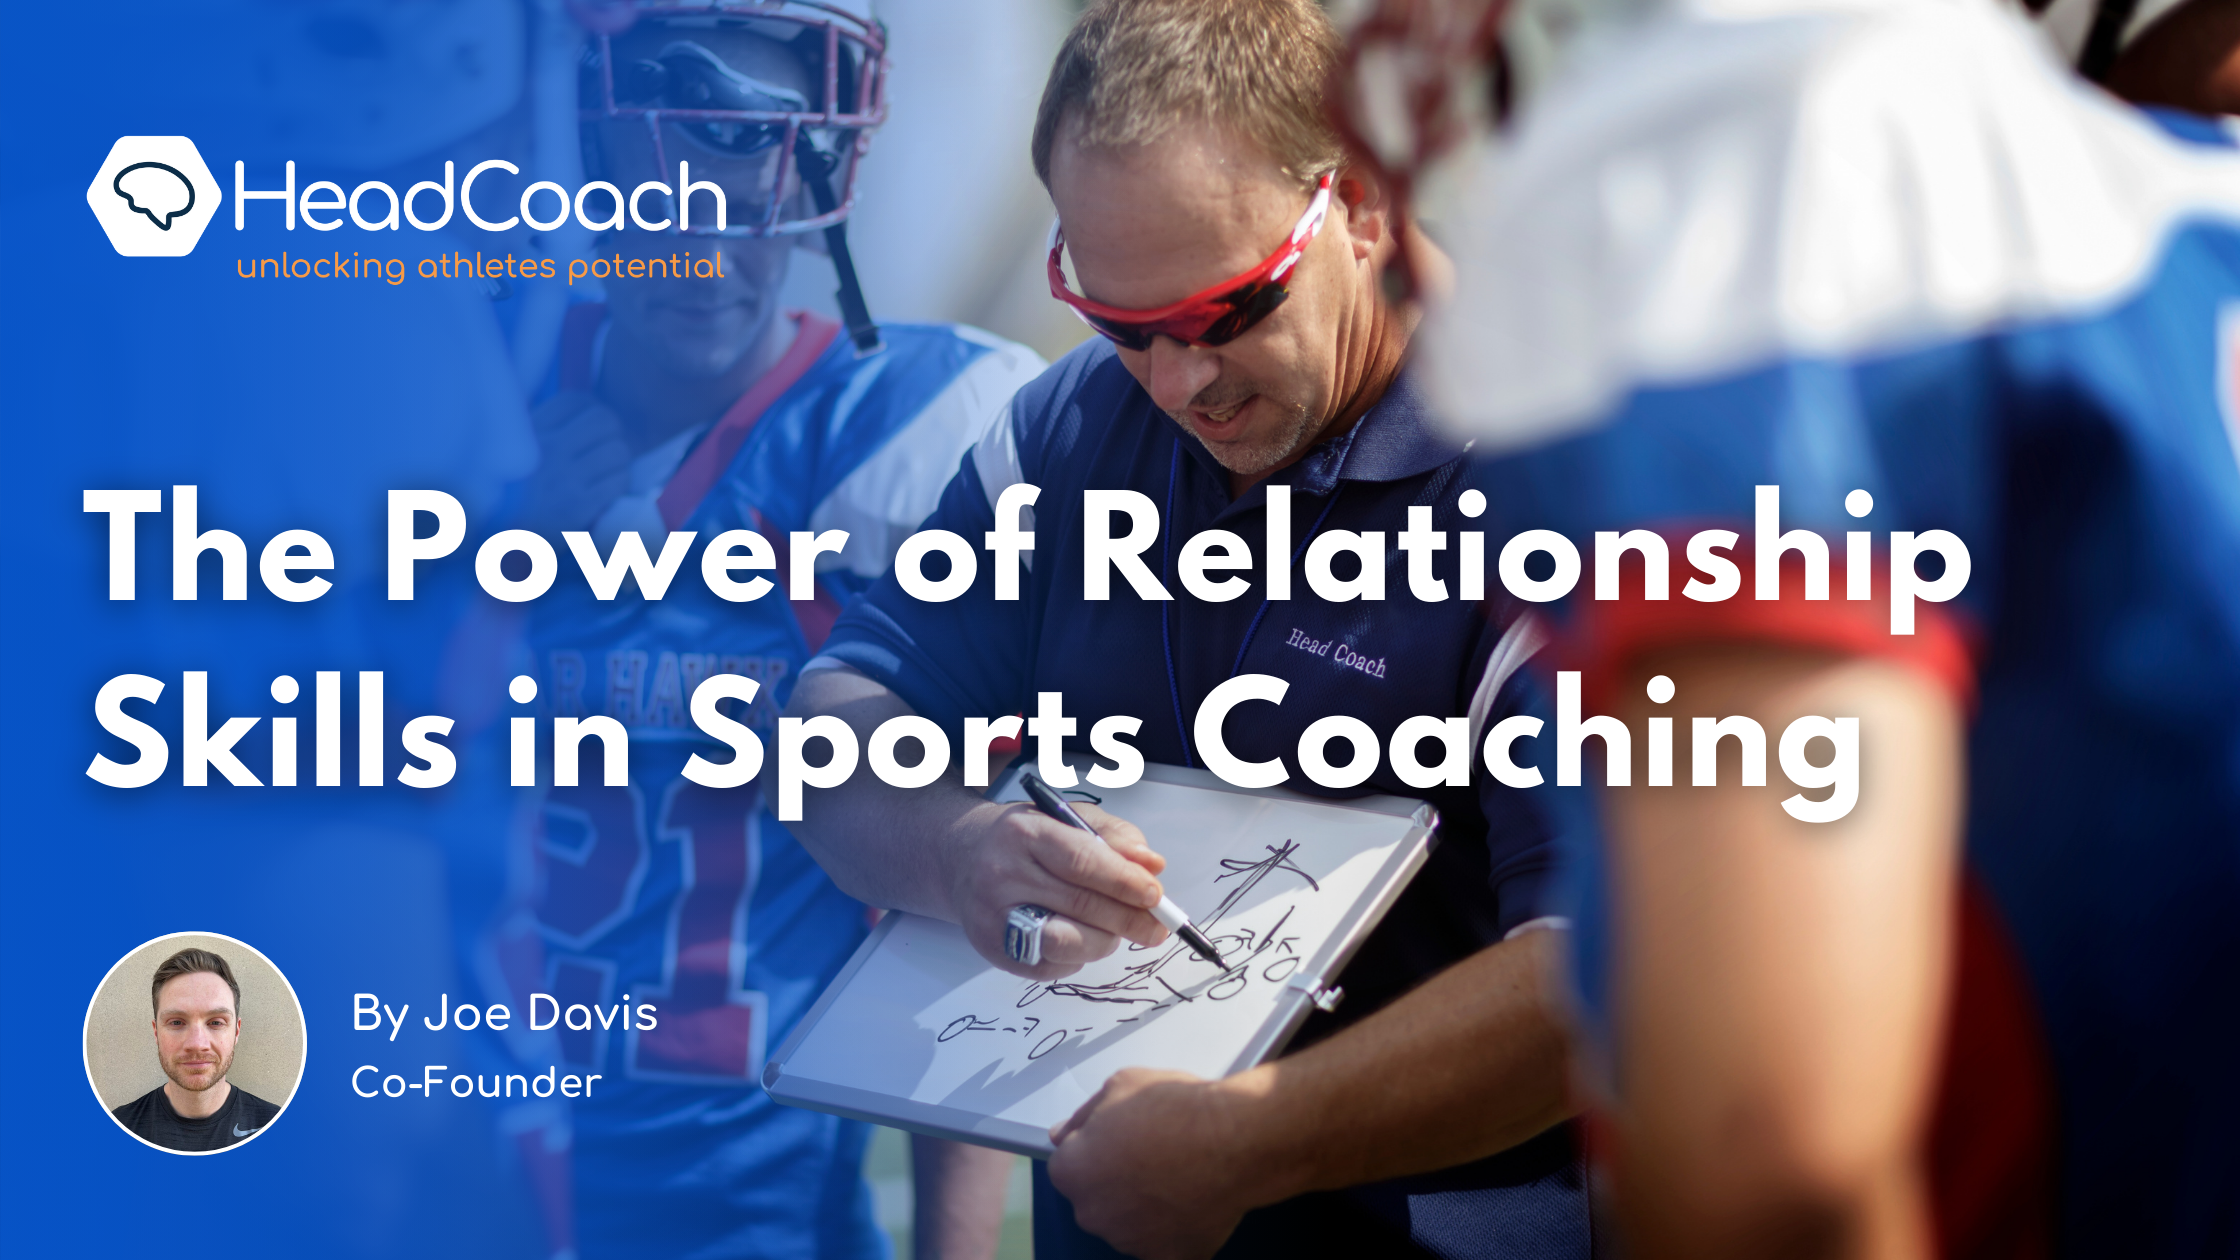 The Power of Relationship Skills in Sports Coaching